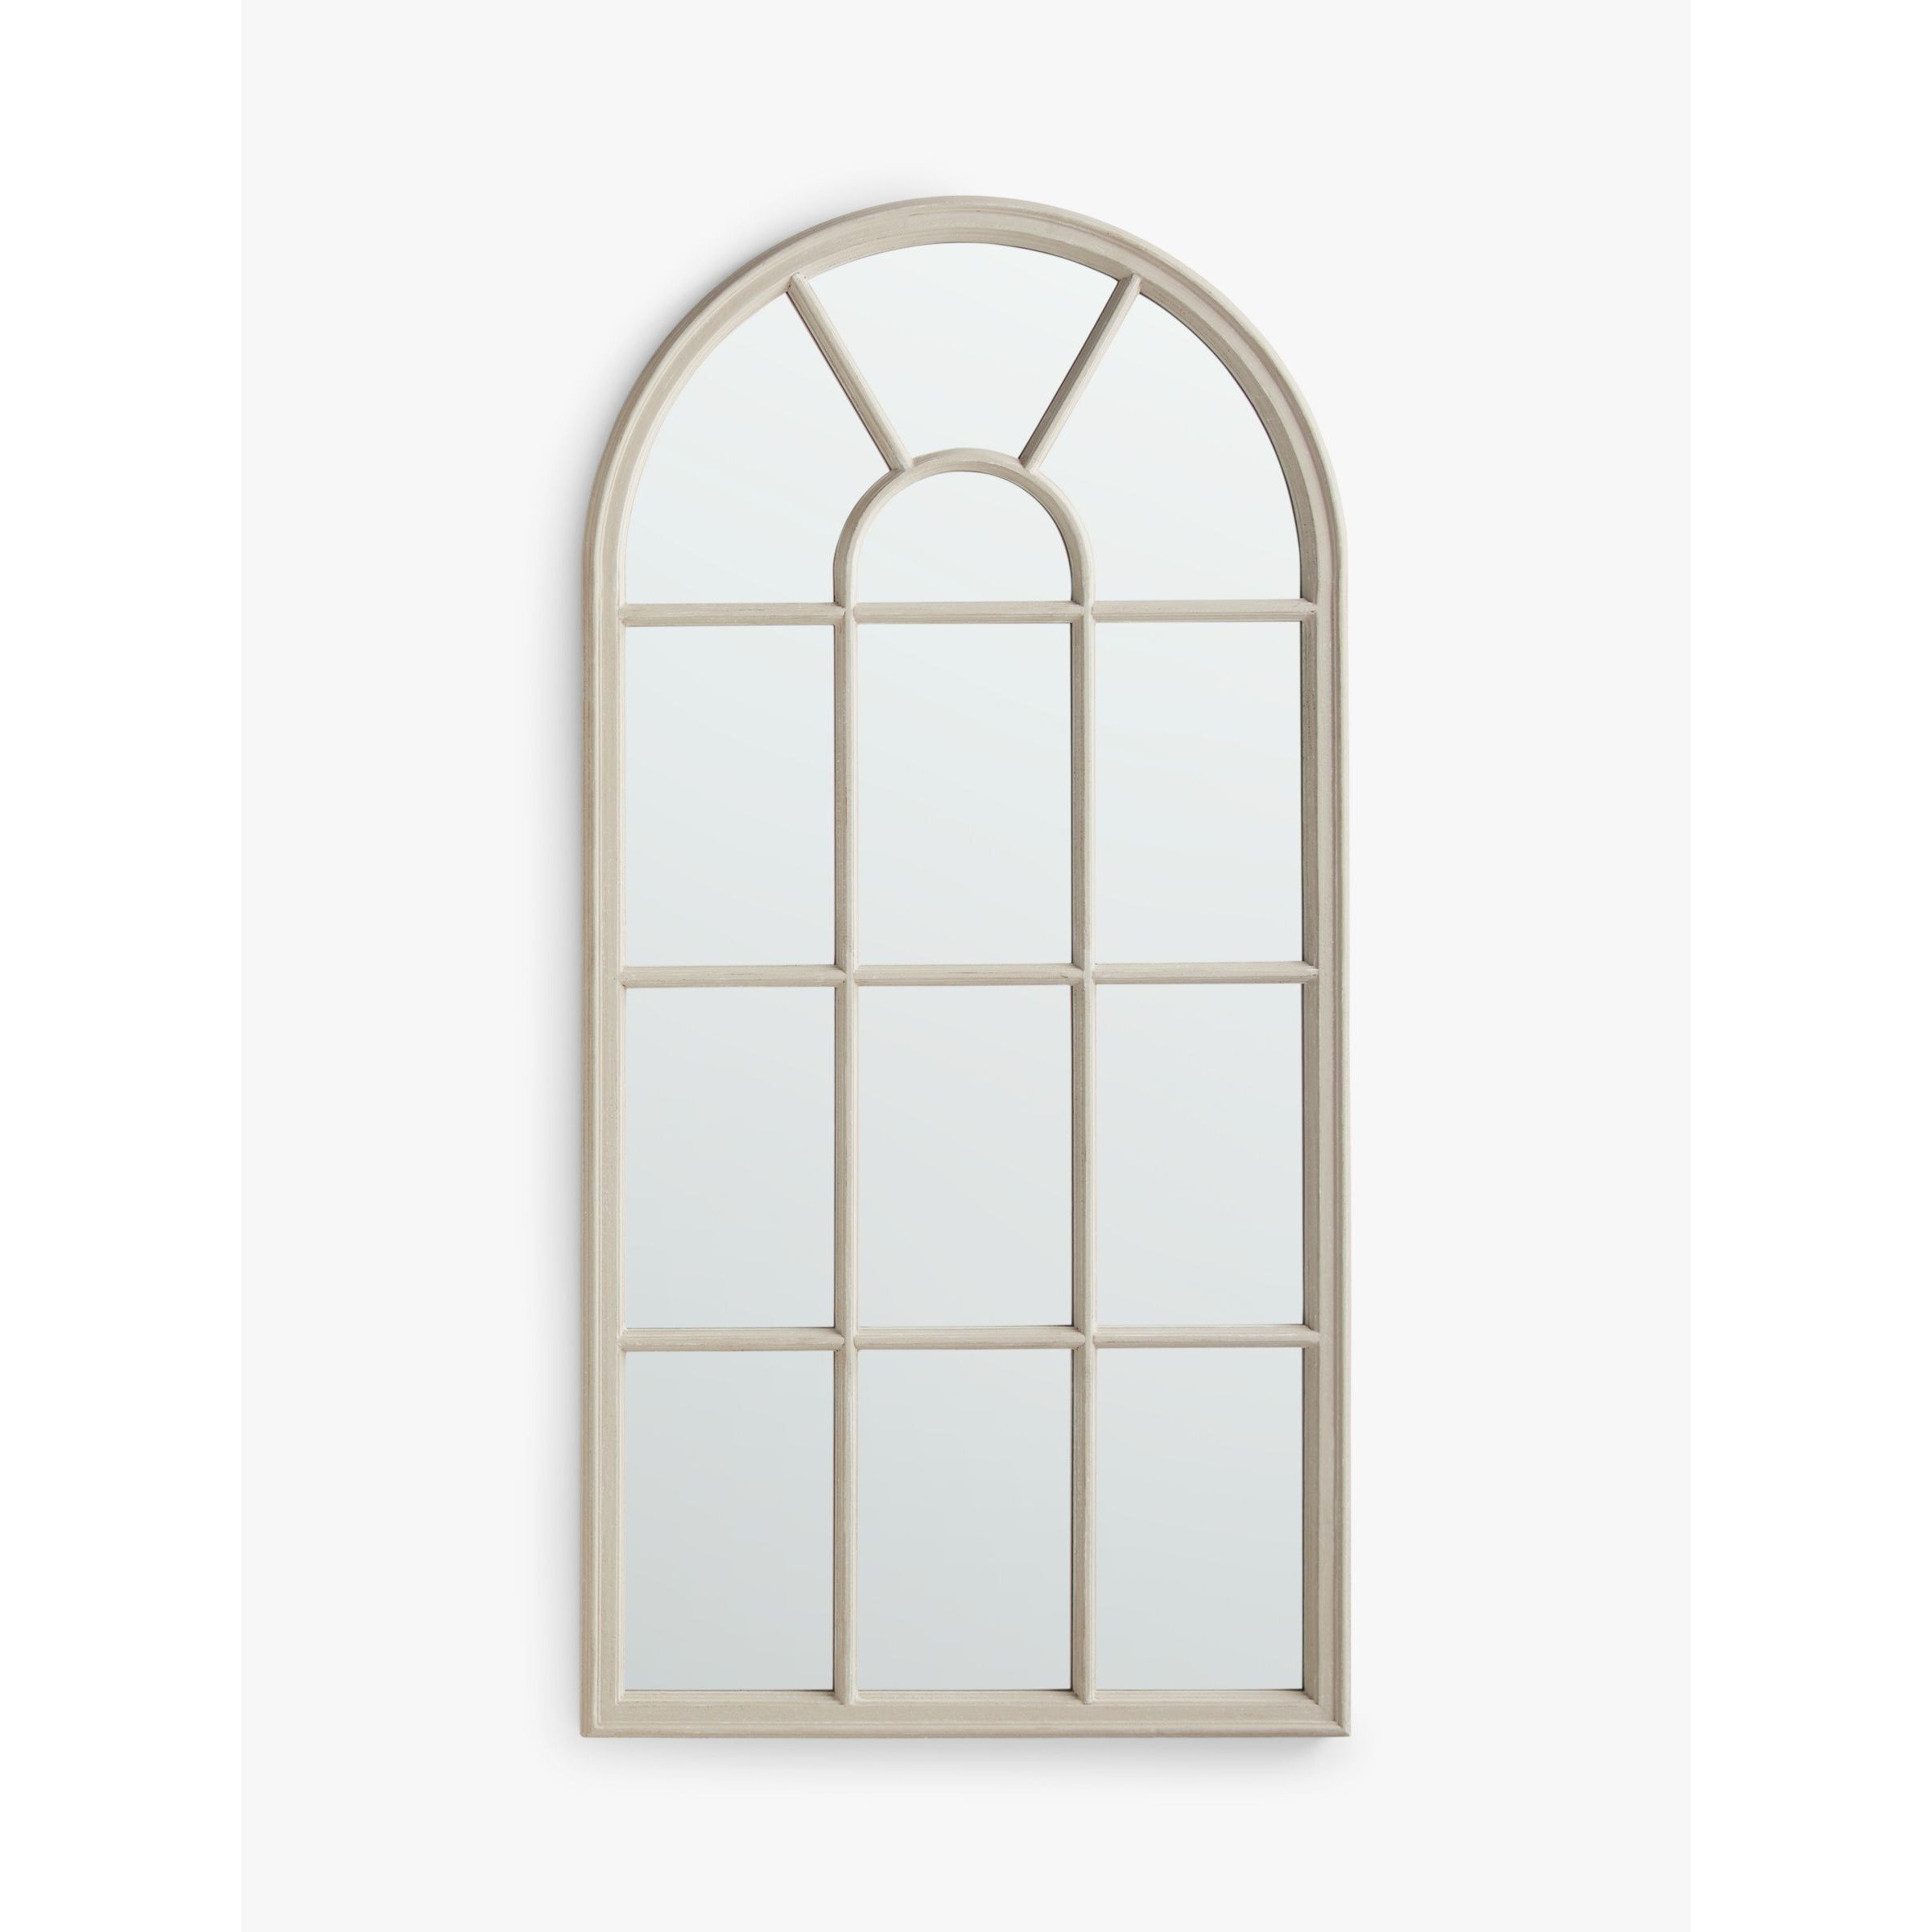 John Lewis Arched Wood Frame Window Wall Mirror, 140 x 70cm, Taupe - image 1